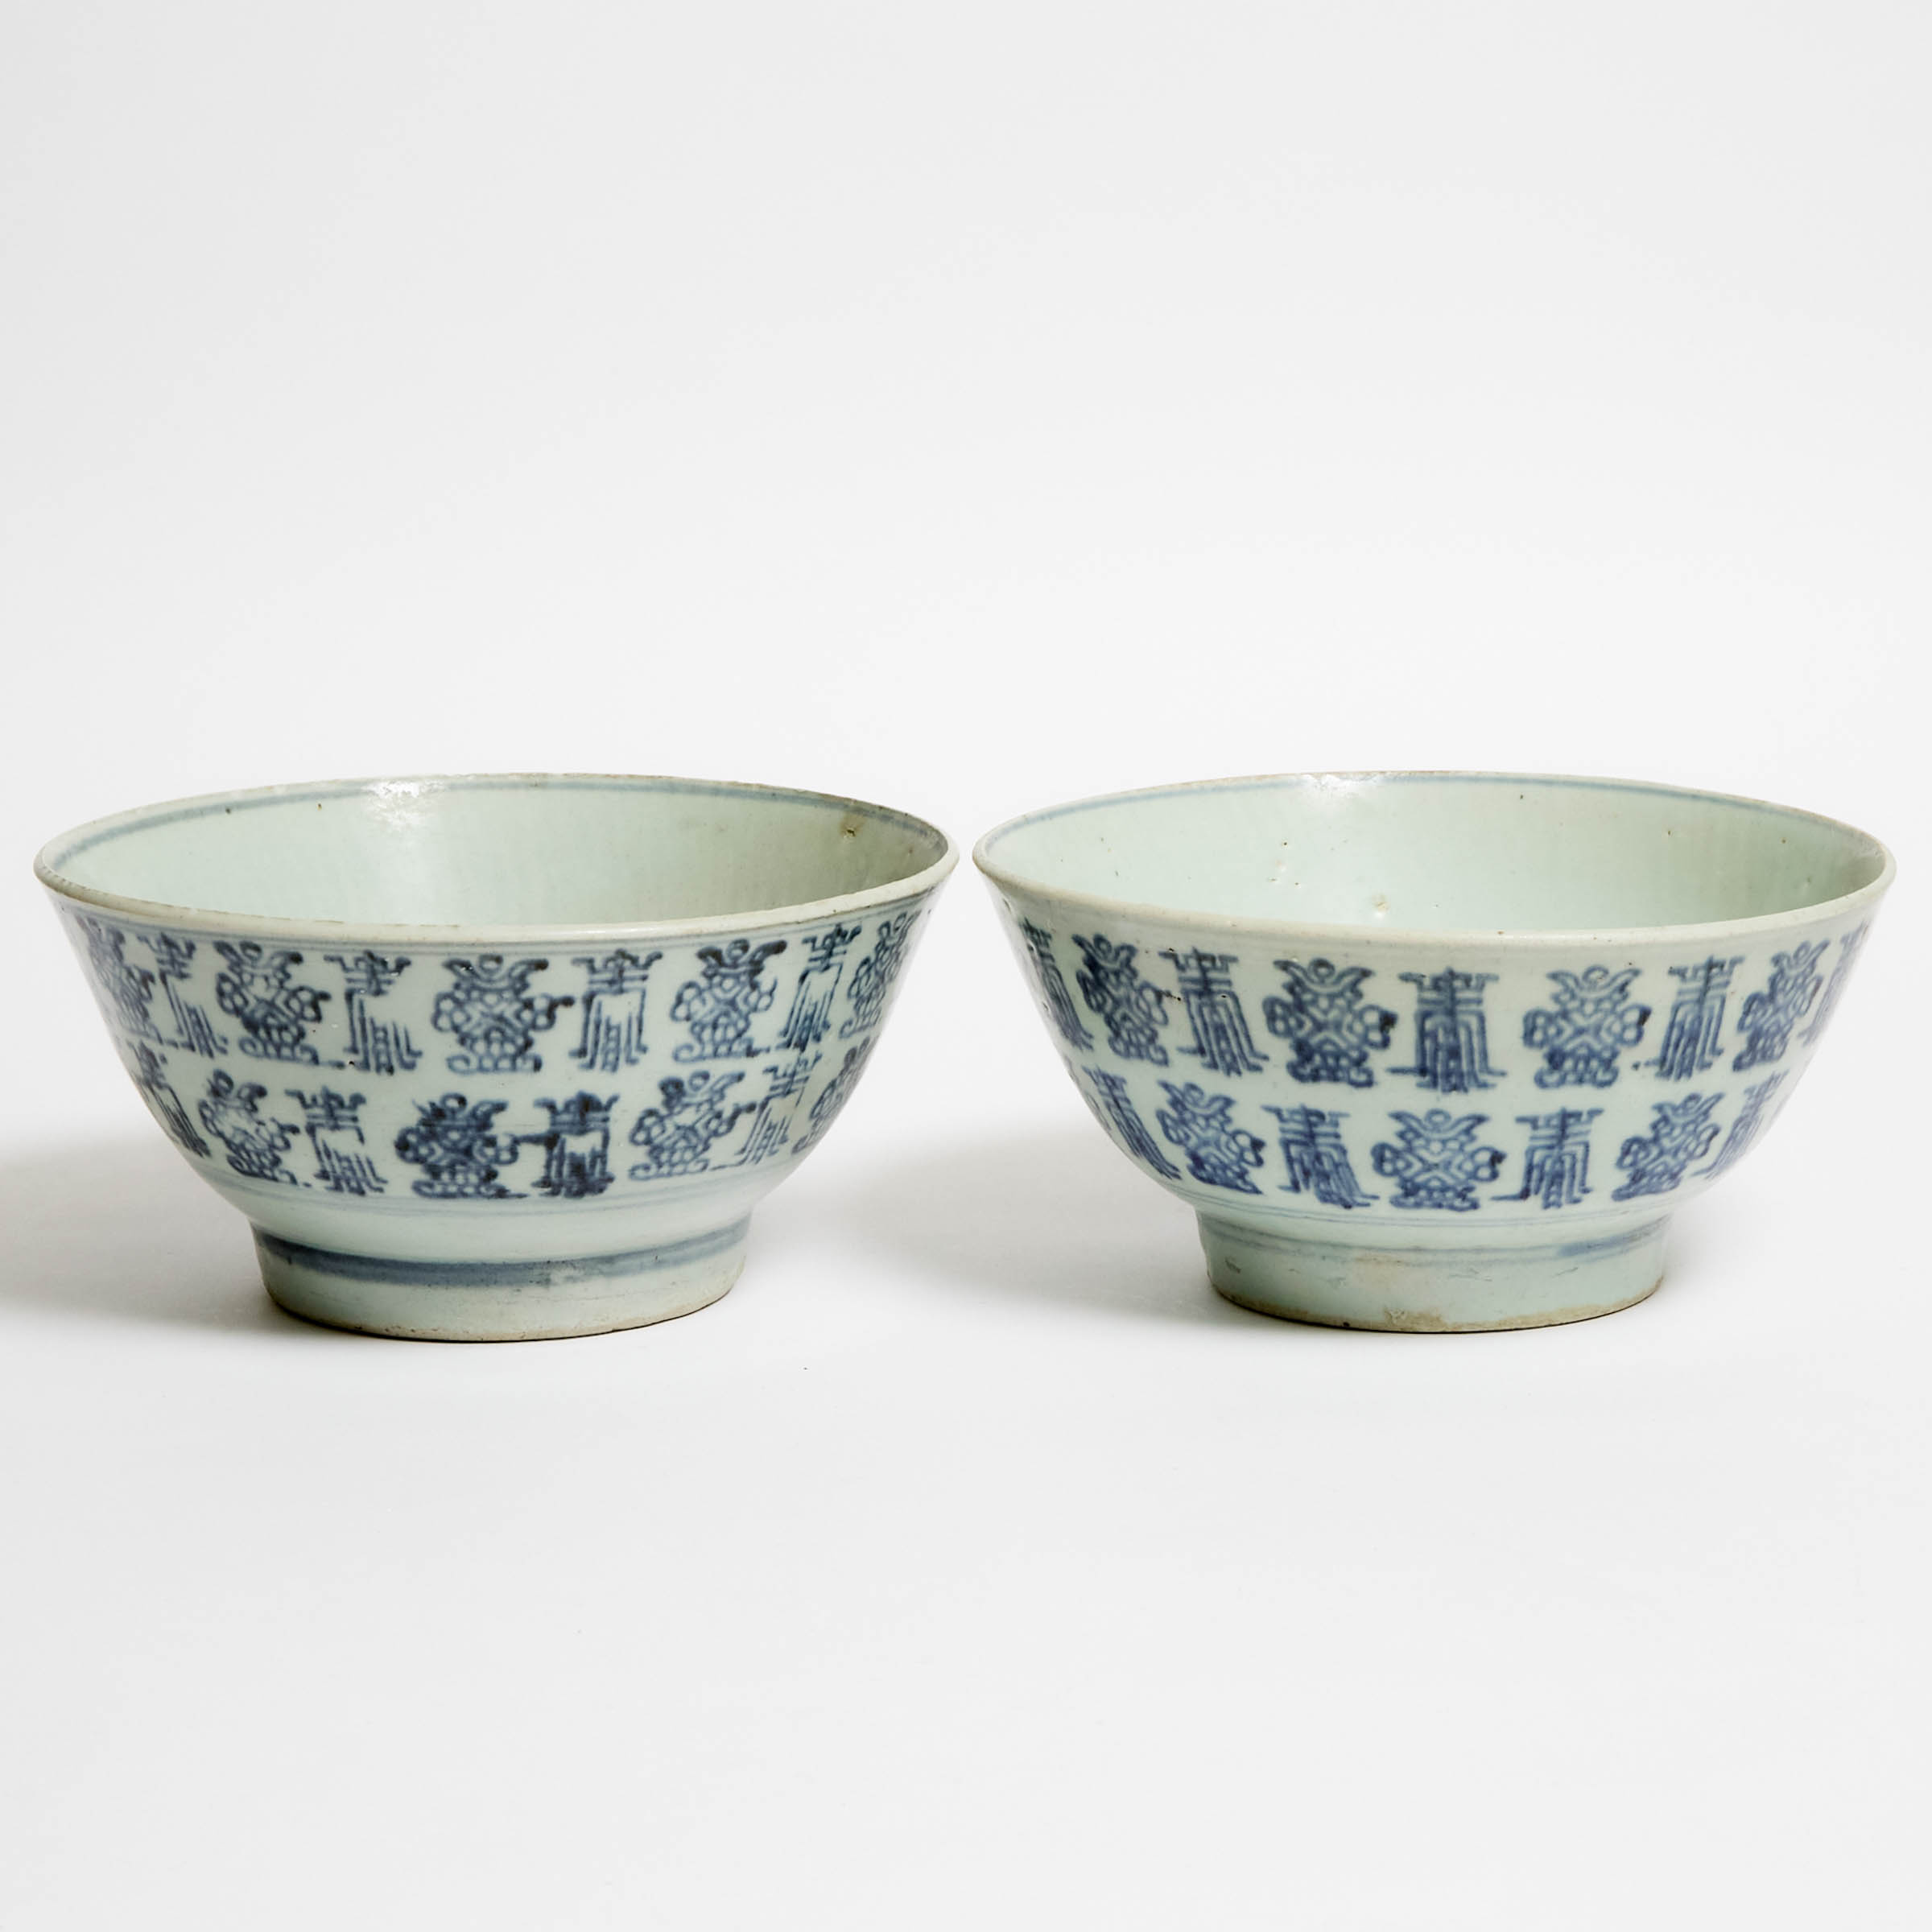 A Pair of Large Swatow Blue and